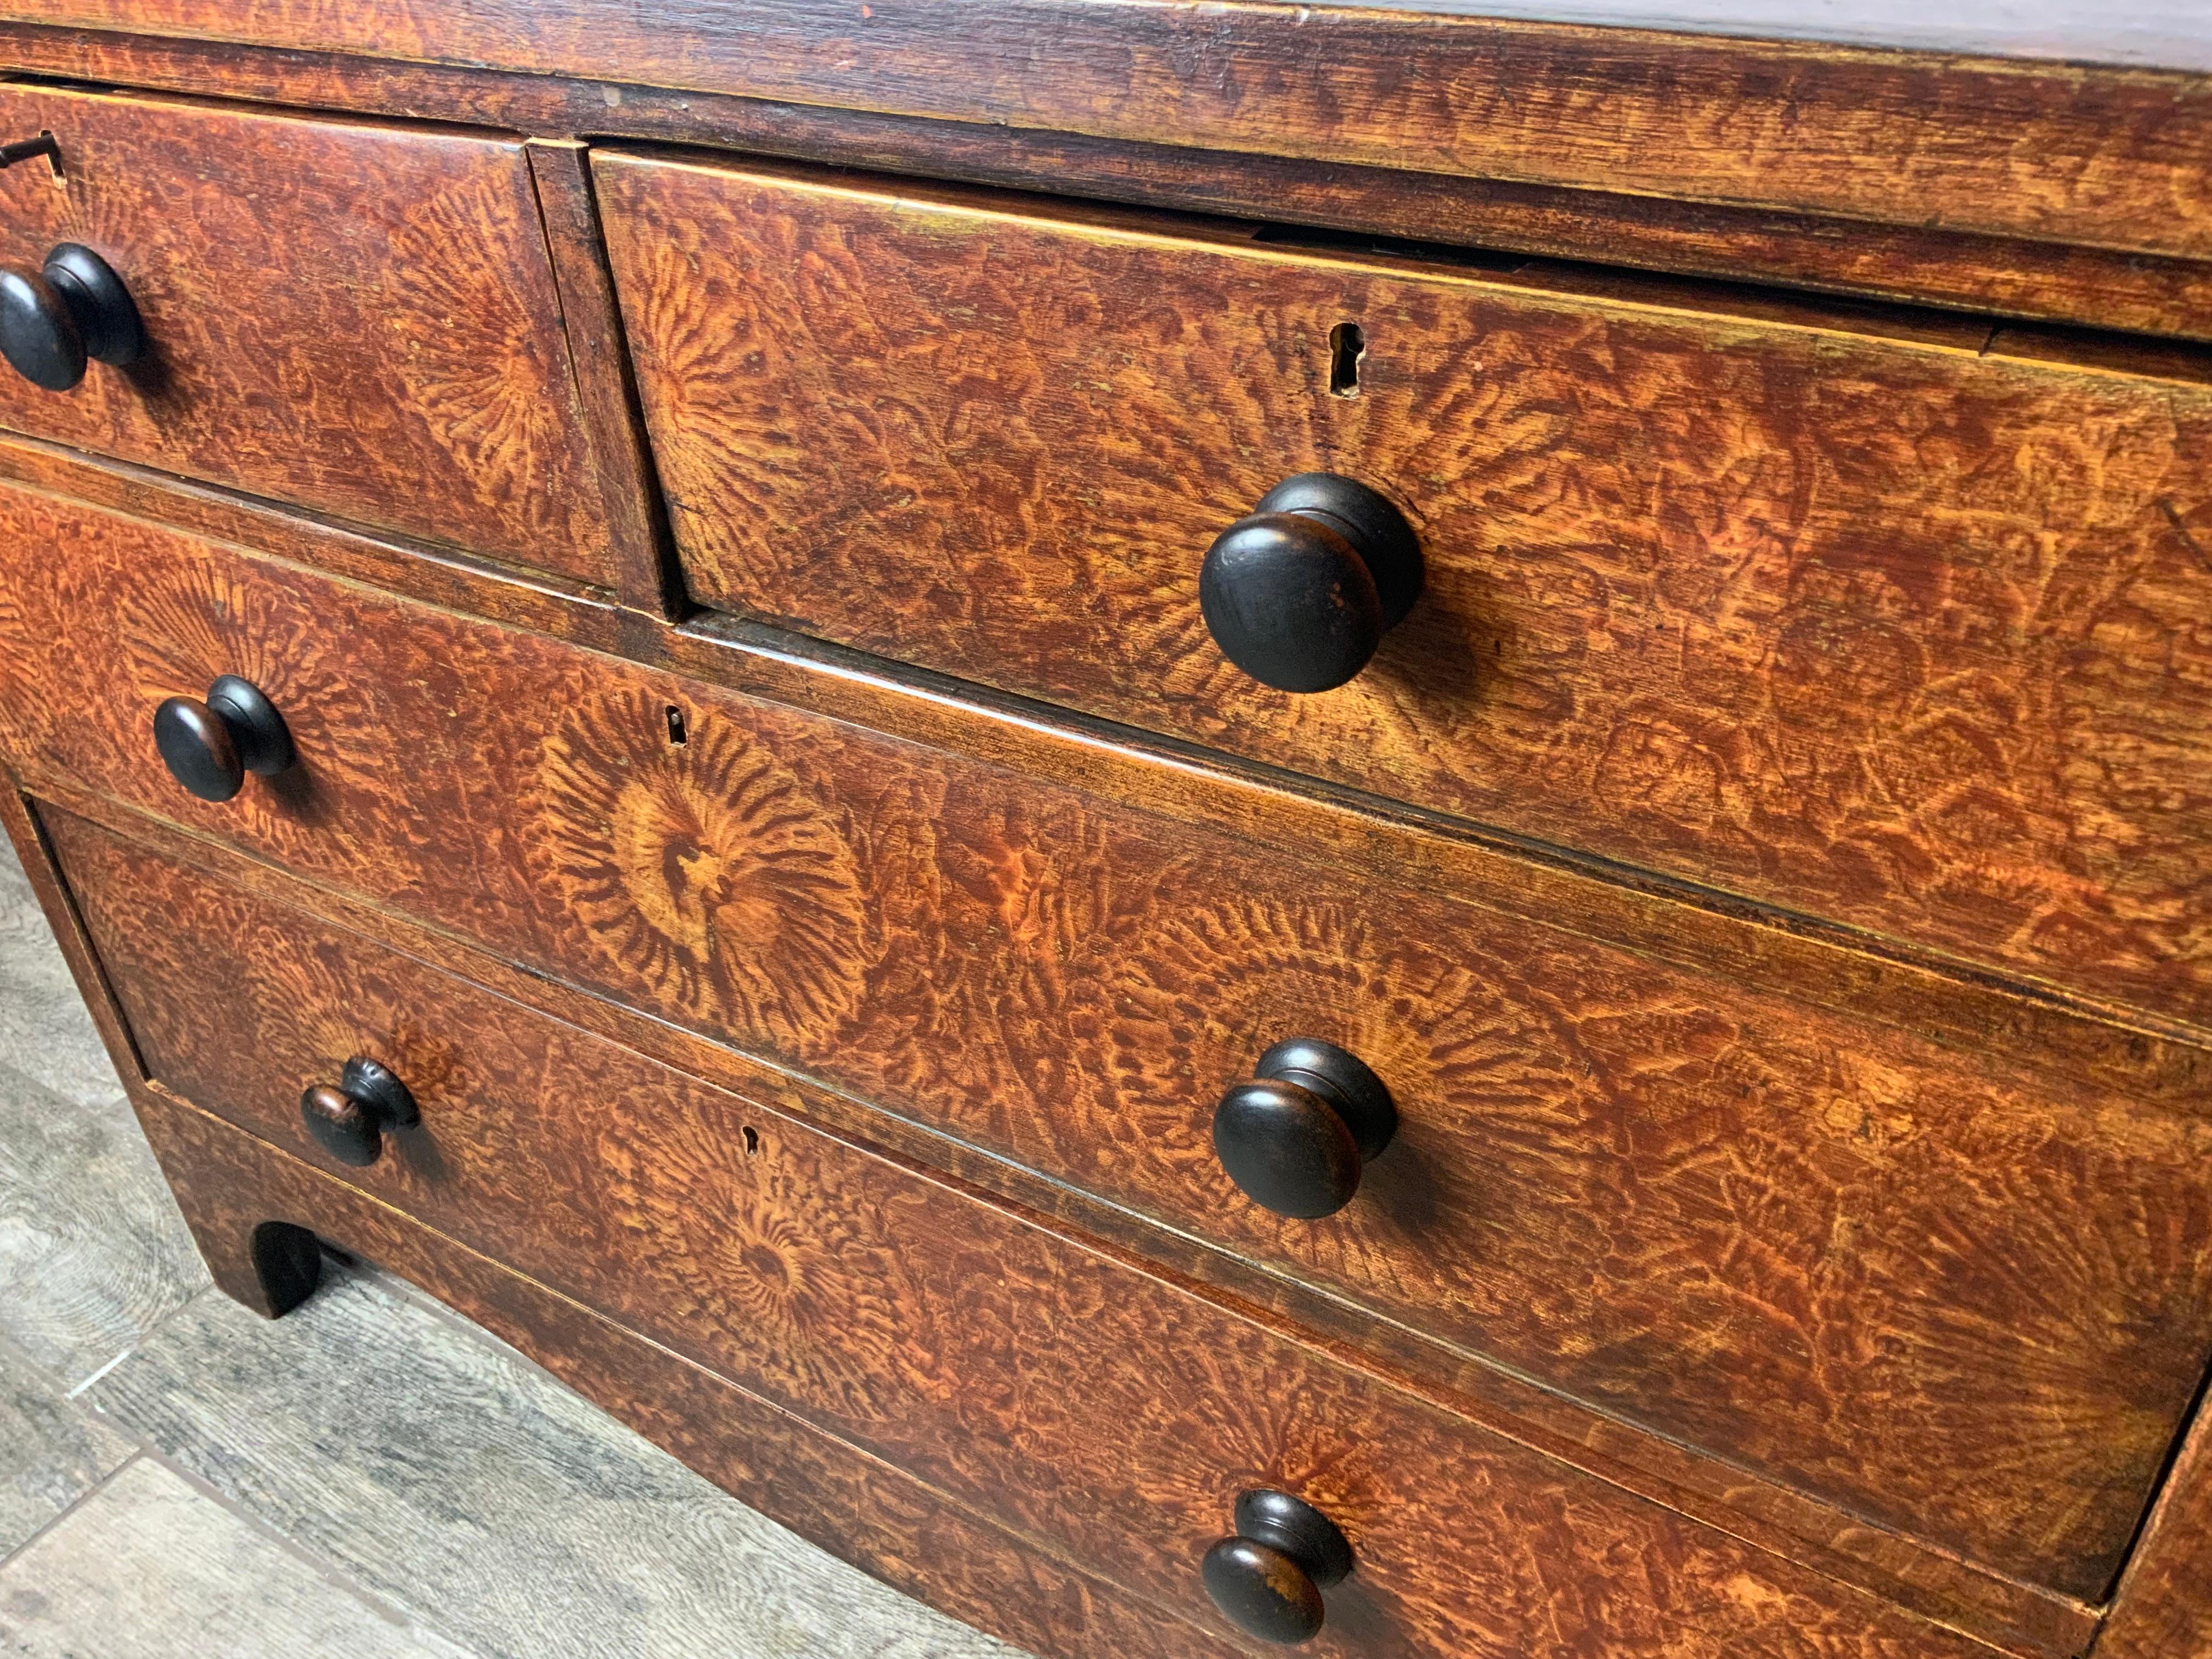 Superb example of a Late 19th century primitive paint decorated New England four drawer chest in vinegar sponged paint. The nicely dovetailed drawers are made of Butternut and Cedar and the case is Pine.  The original paint is in very good condition